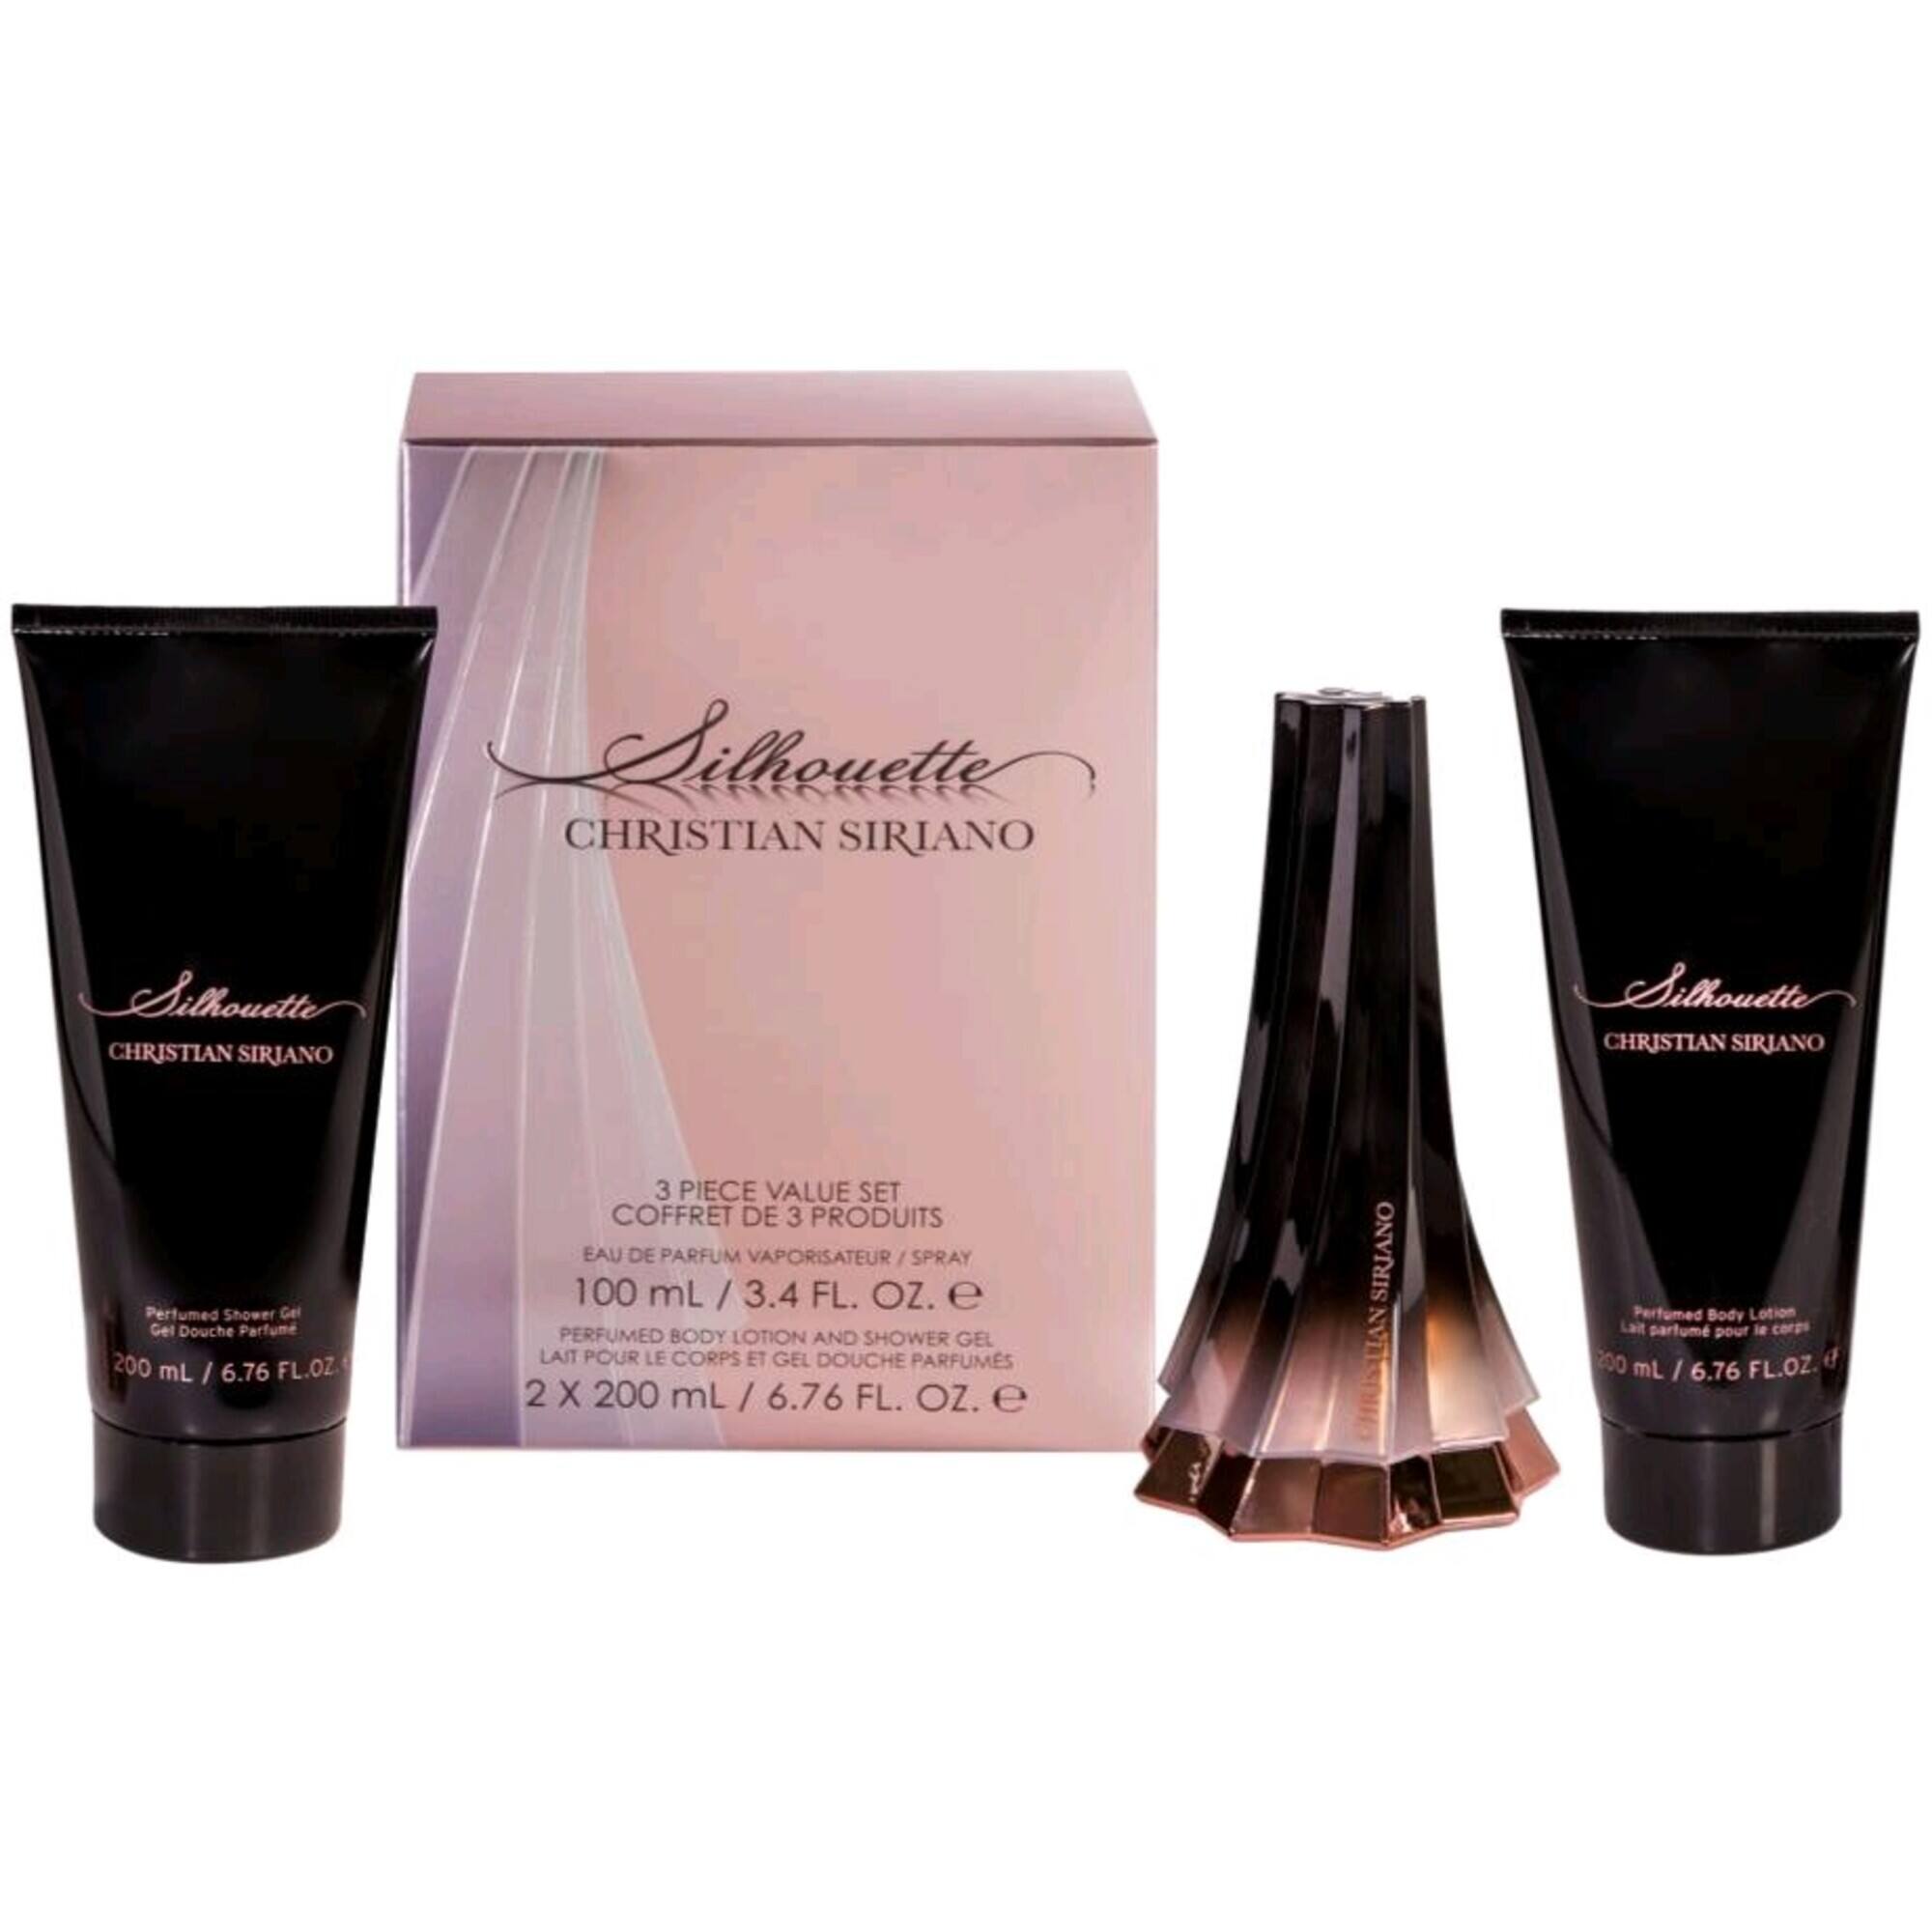 Christian Siriano Women's Gift Set - Silhouette Captivating Fragrance, 3 piece